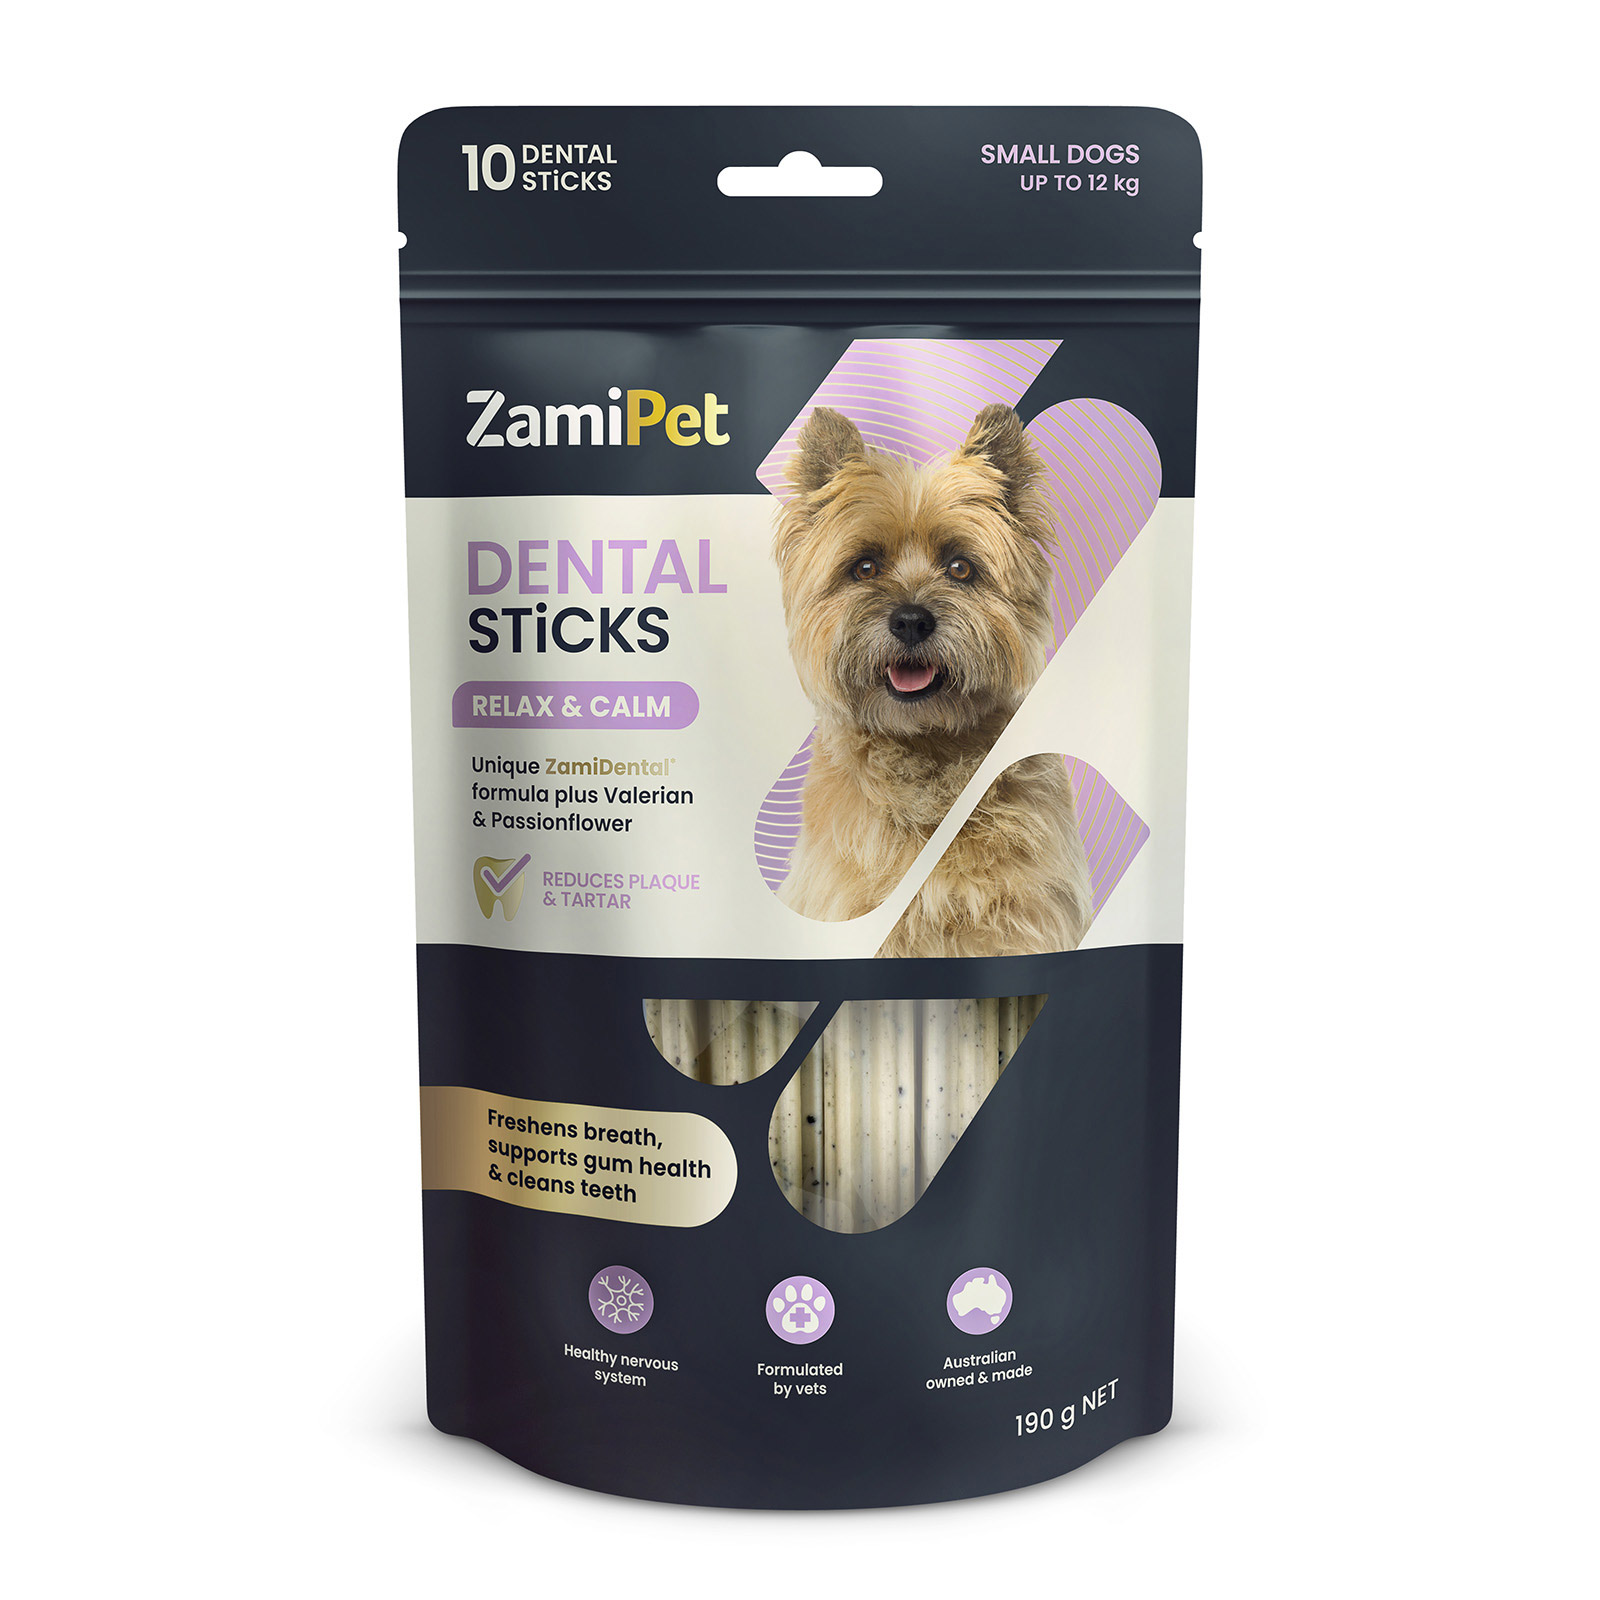 ZamiPet Dental Sticks Relax & Calm Dog Treats (Small Dogs Up To 12kg)